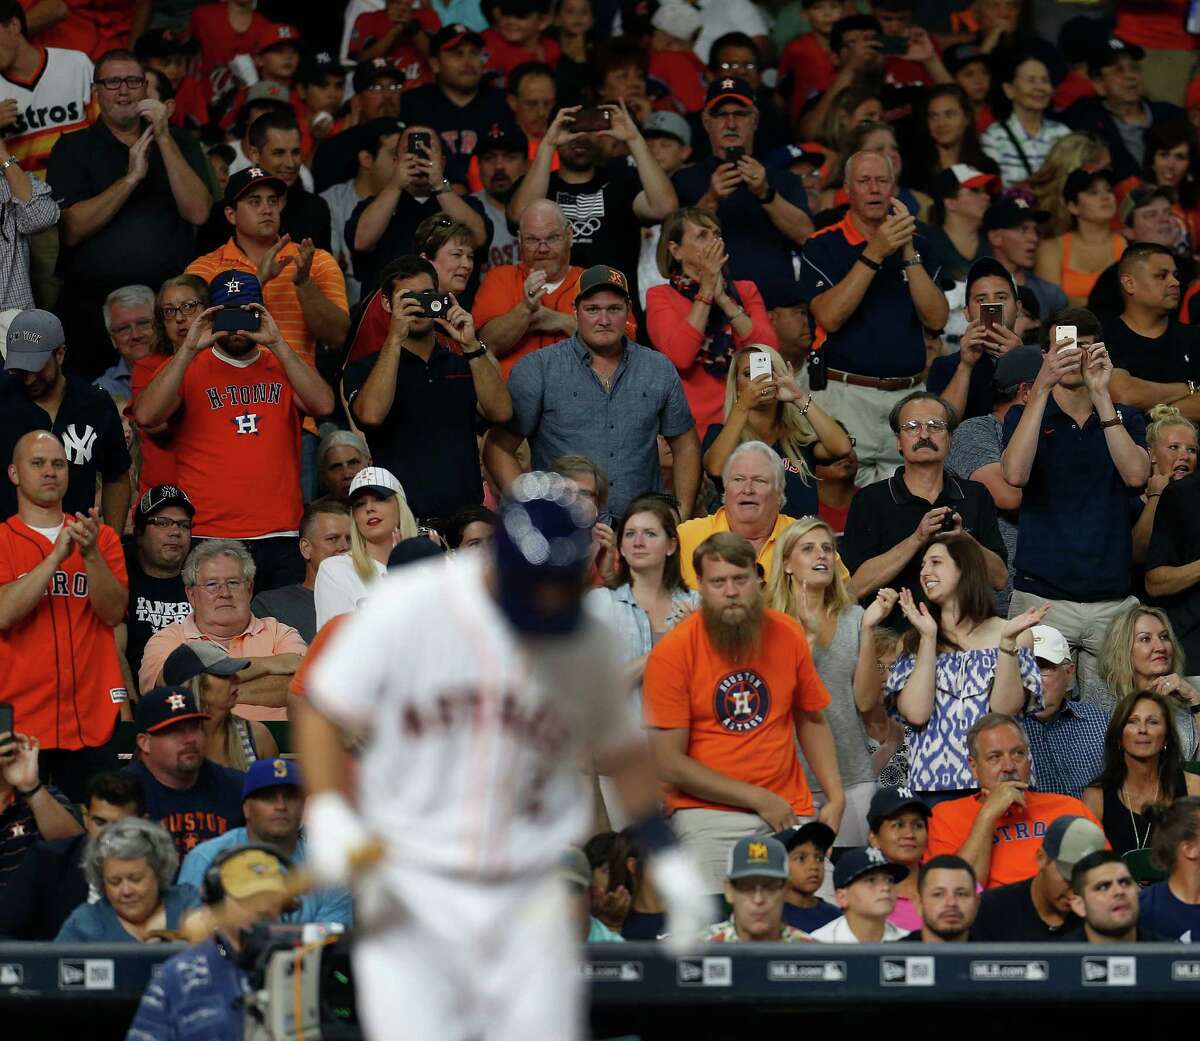 Fans stand and cheer as Houston Astros third baseman Alex Bregman (2) takes his first Major League at bat during the second inning of an MLB game at Minute Maid Park, Monday, July 25, 2016, in Houston.